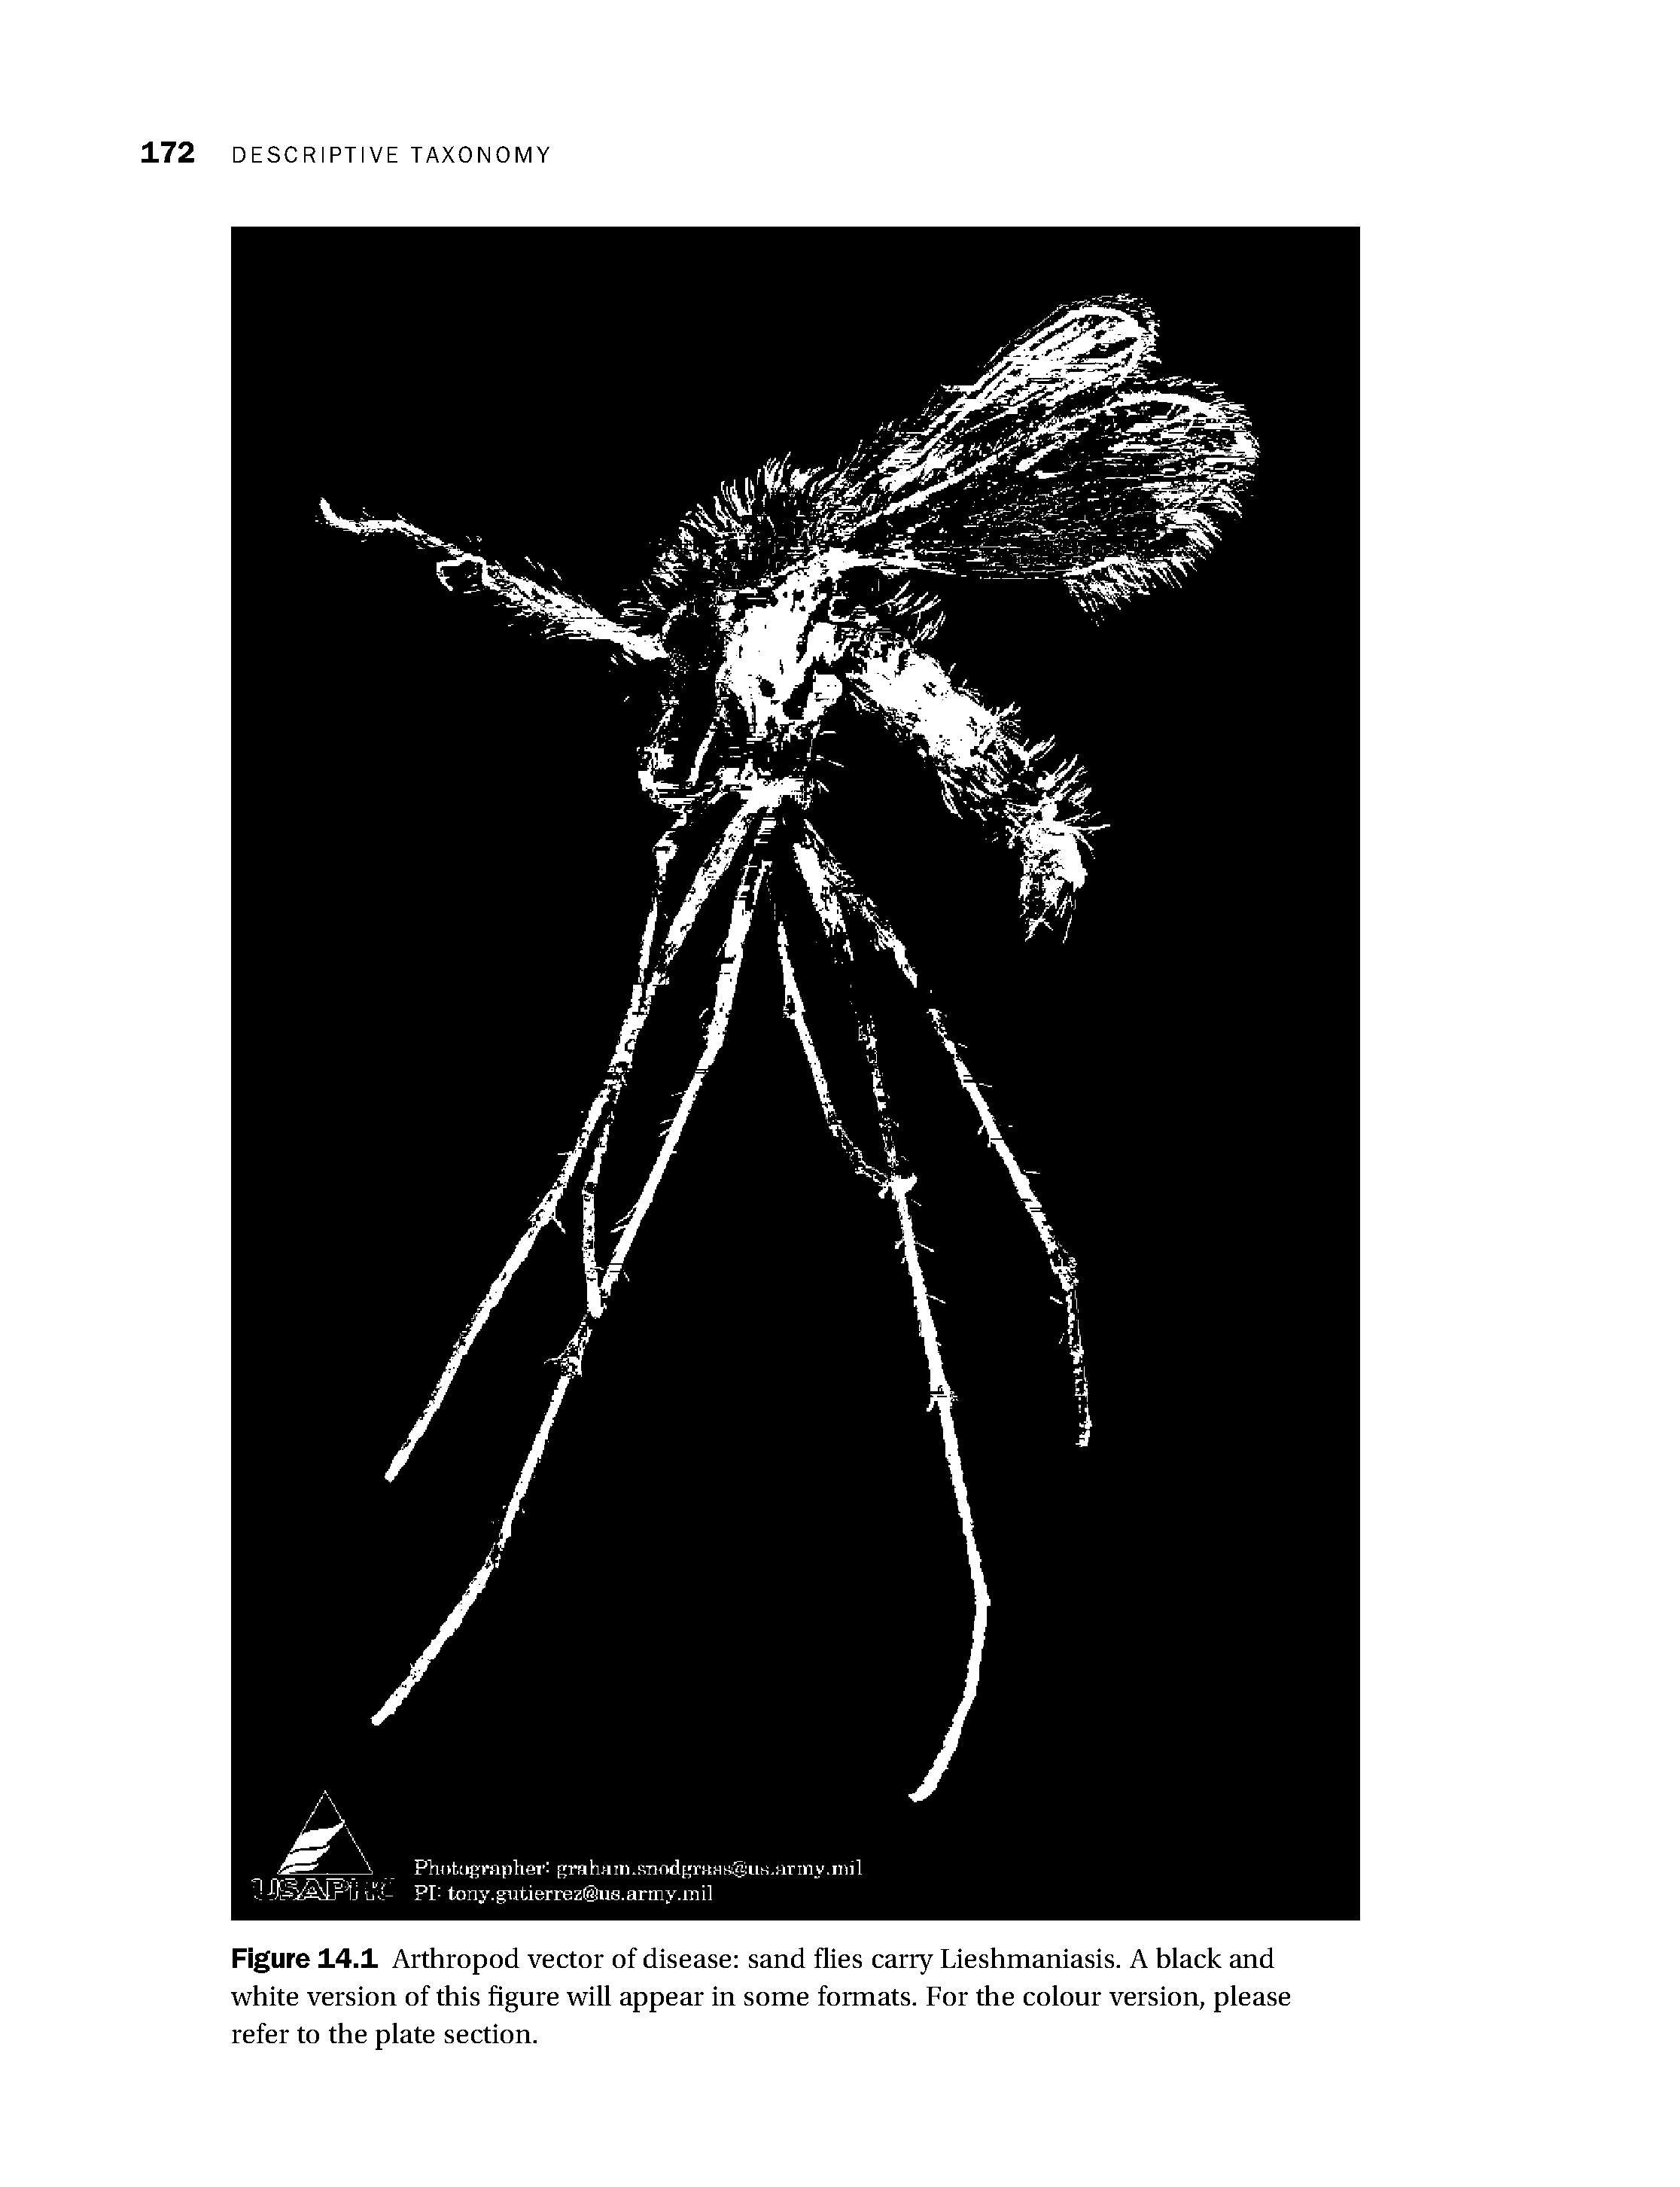 Figure 14.1 Arthropod vector of disease sand flies carry Lieshmaniasis. A black and tvhite version of this figure tvill appear in some formats. For the colour version, please refer to the plate section.